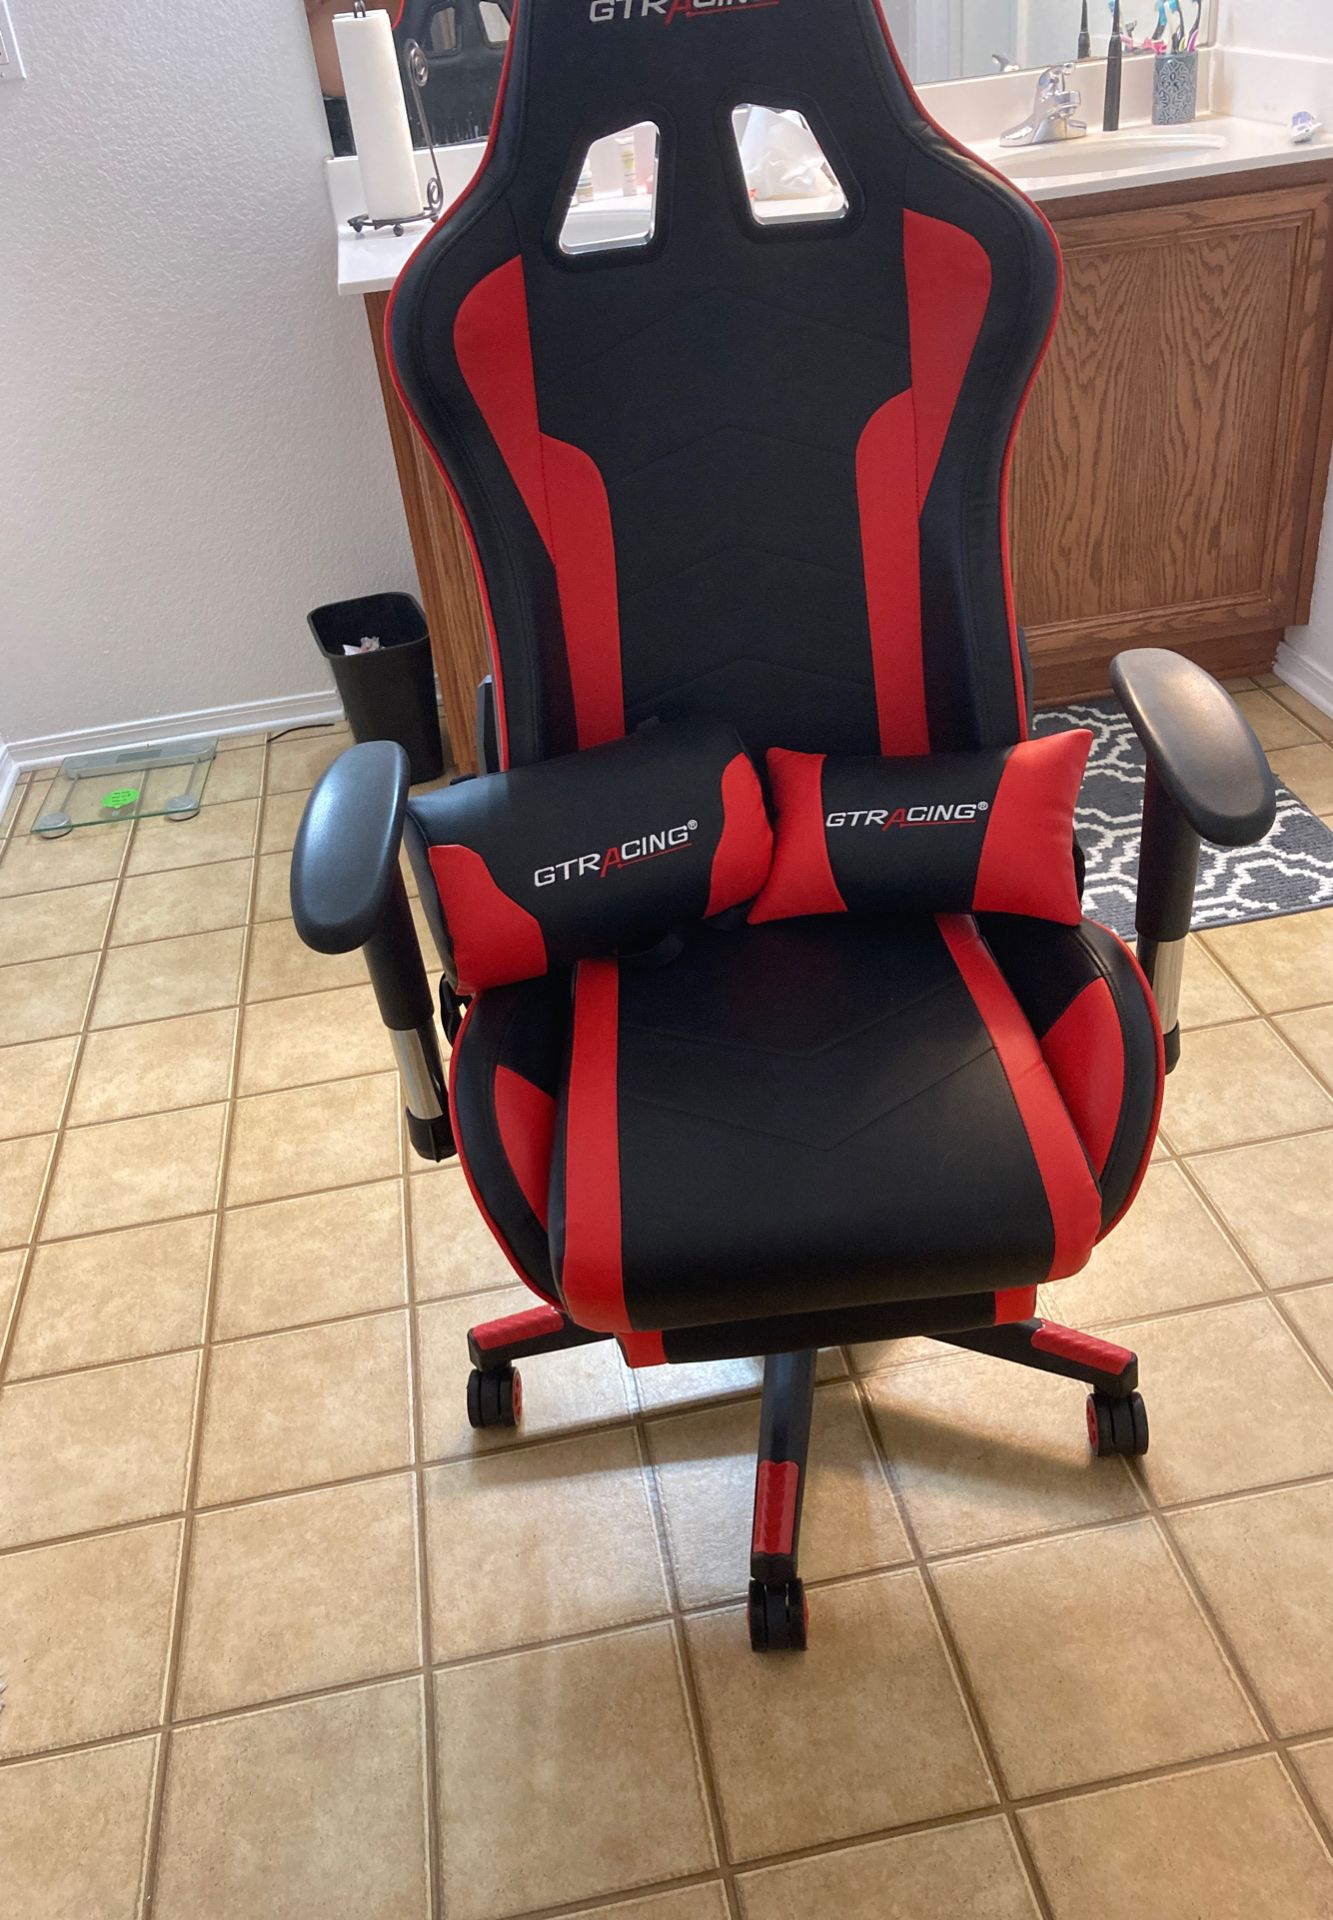 GRR Raving gaming chair with Bluetooth built in speakers